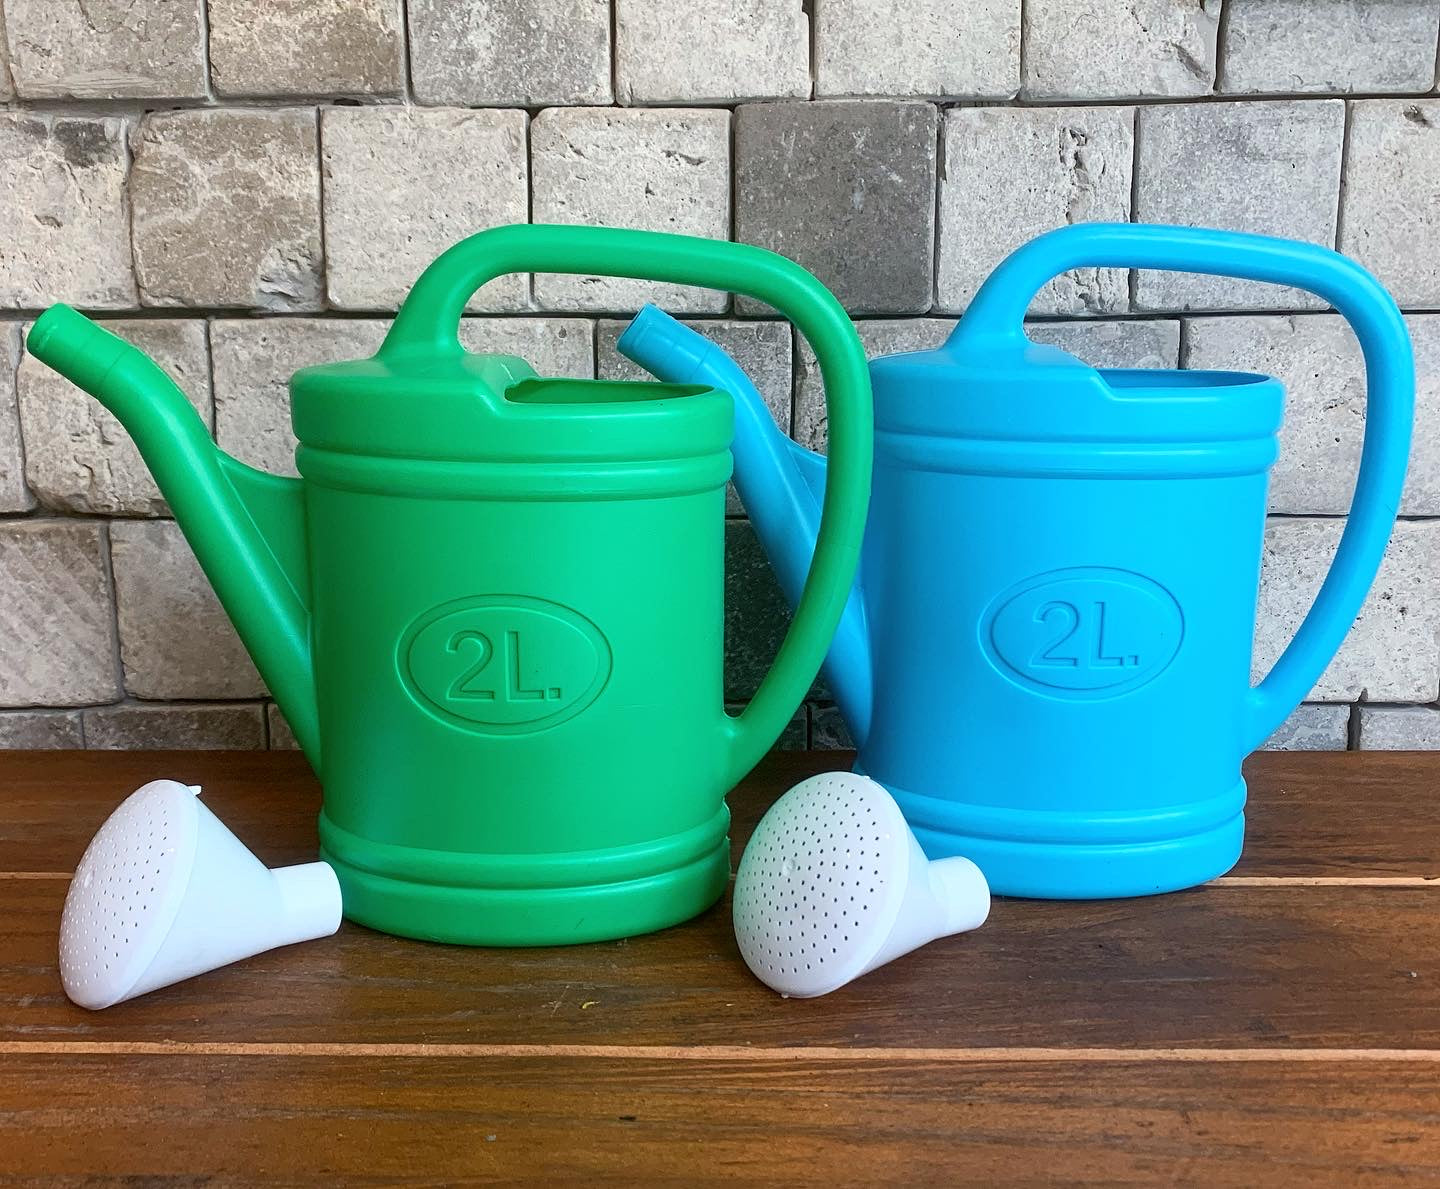 Qilebi Plants Watering Can with a detachable shower nozzle. high quality Plastics. Suitable Nozzle for hard-to-reach areas.